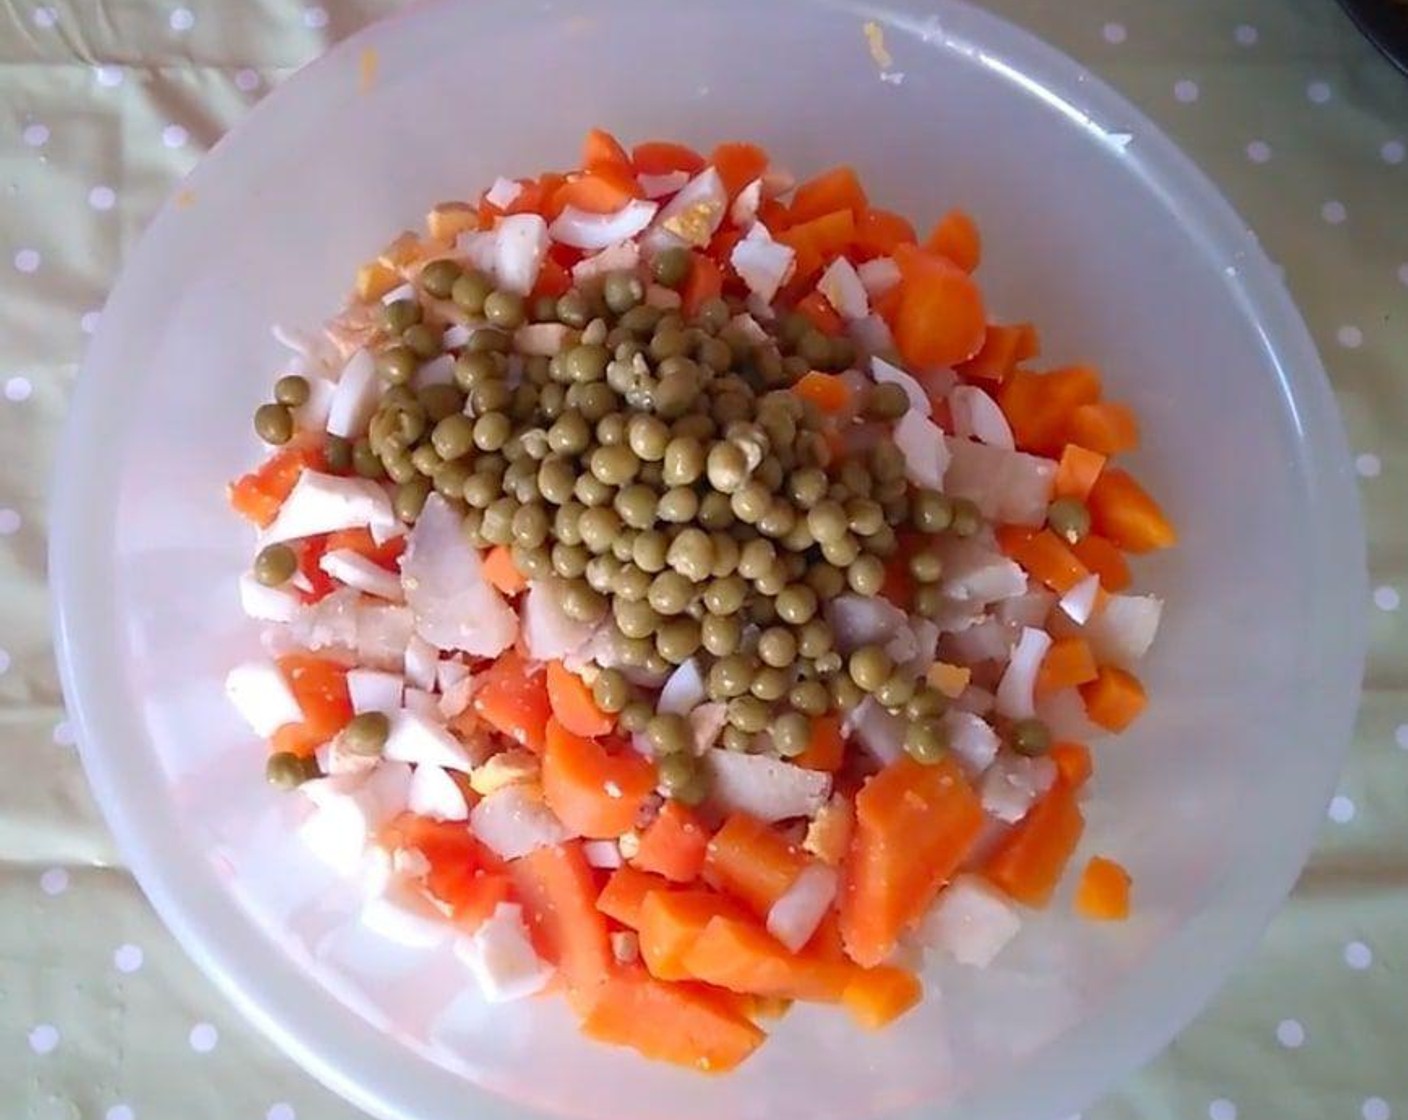 step 7 In a bowl mix together the potatoes, carrots, eggs, imitation crab, Mayonnaise (2 cups), Canned Tuna (1 can), and Green Peas (to taste).